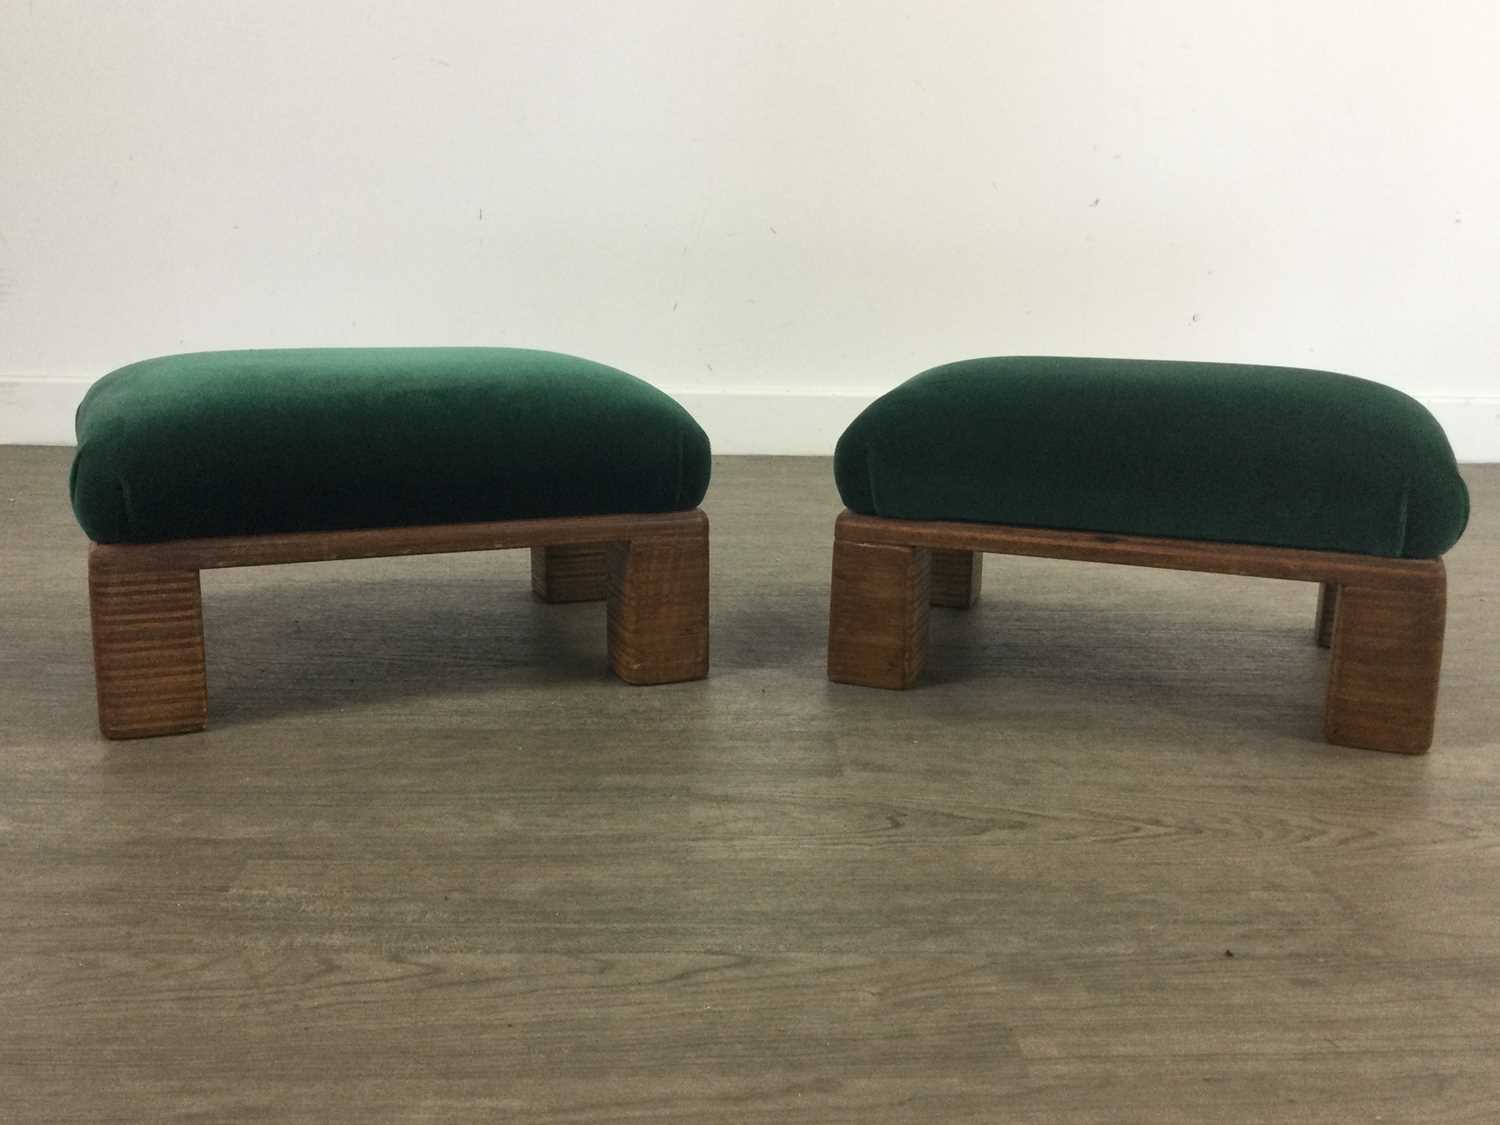 A PAIR OF PINE FRAMED UPHOLSTERED FOOTSTOOLS